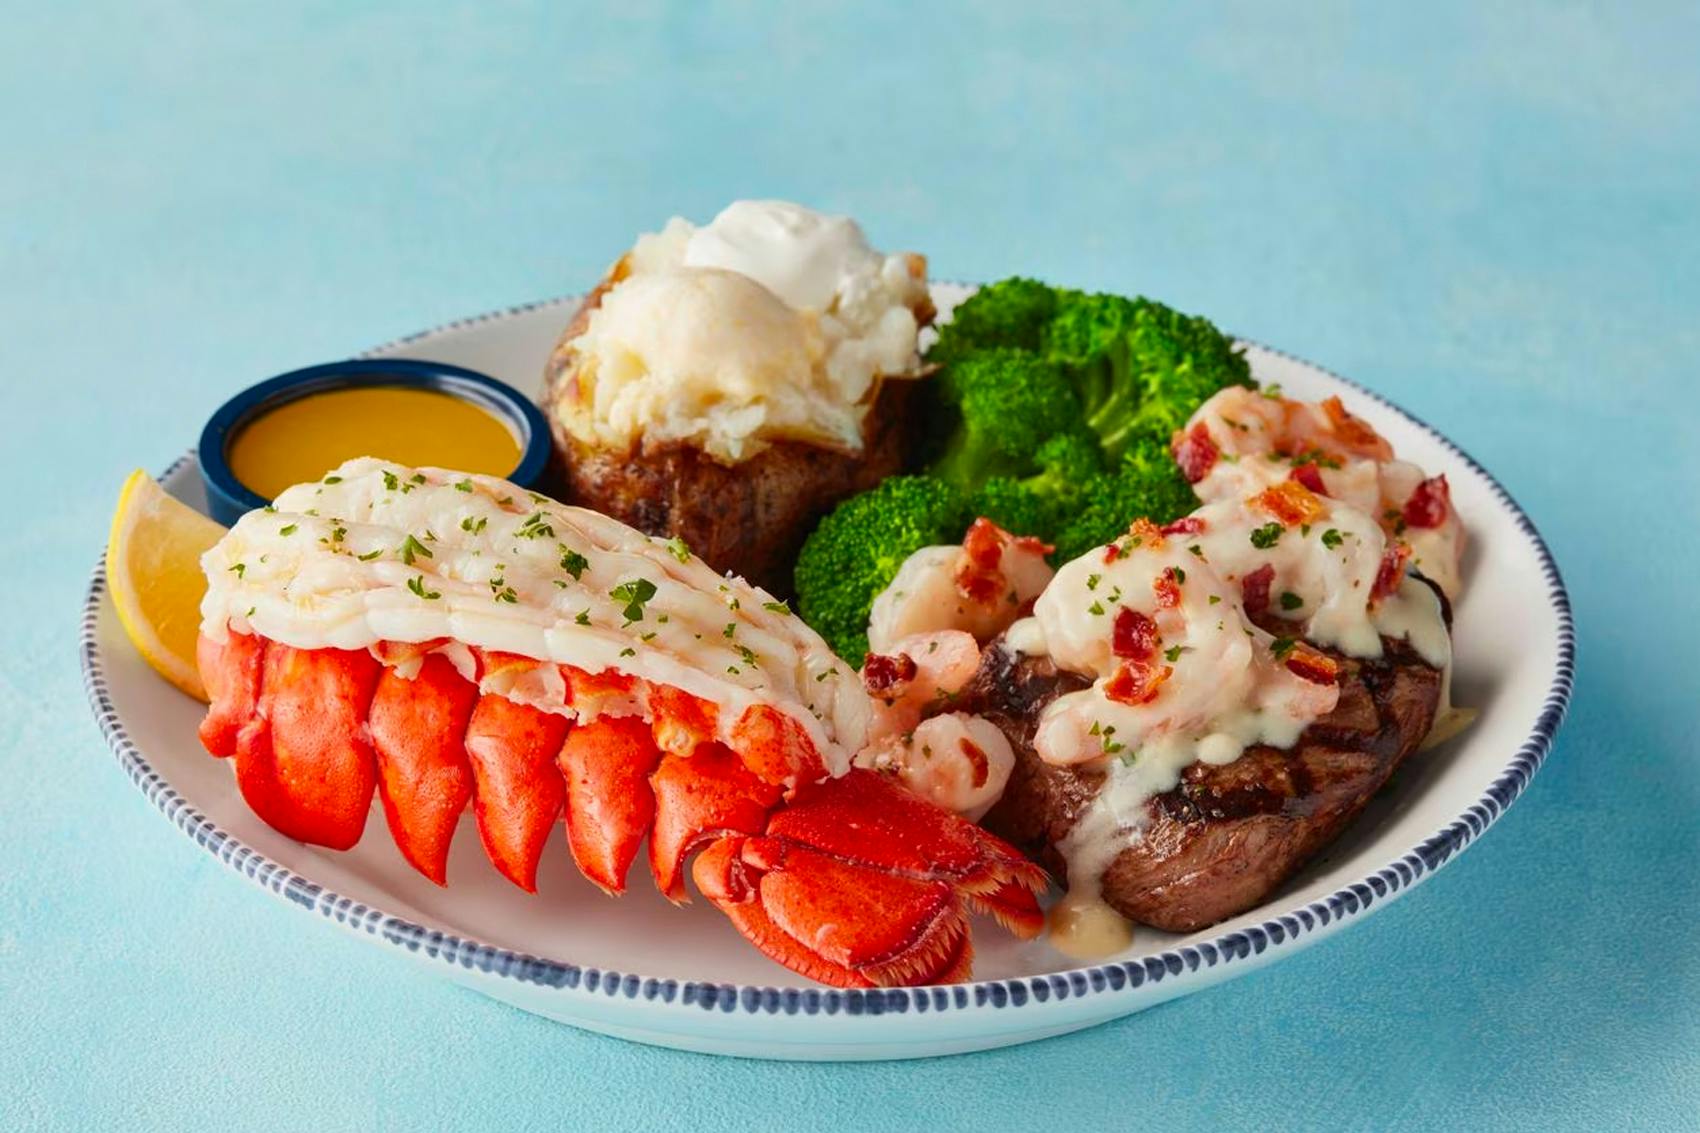 Plate from Red lobster that includes lobster broccoli, baked potato and shrimp topped steak